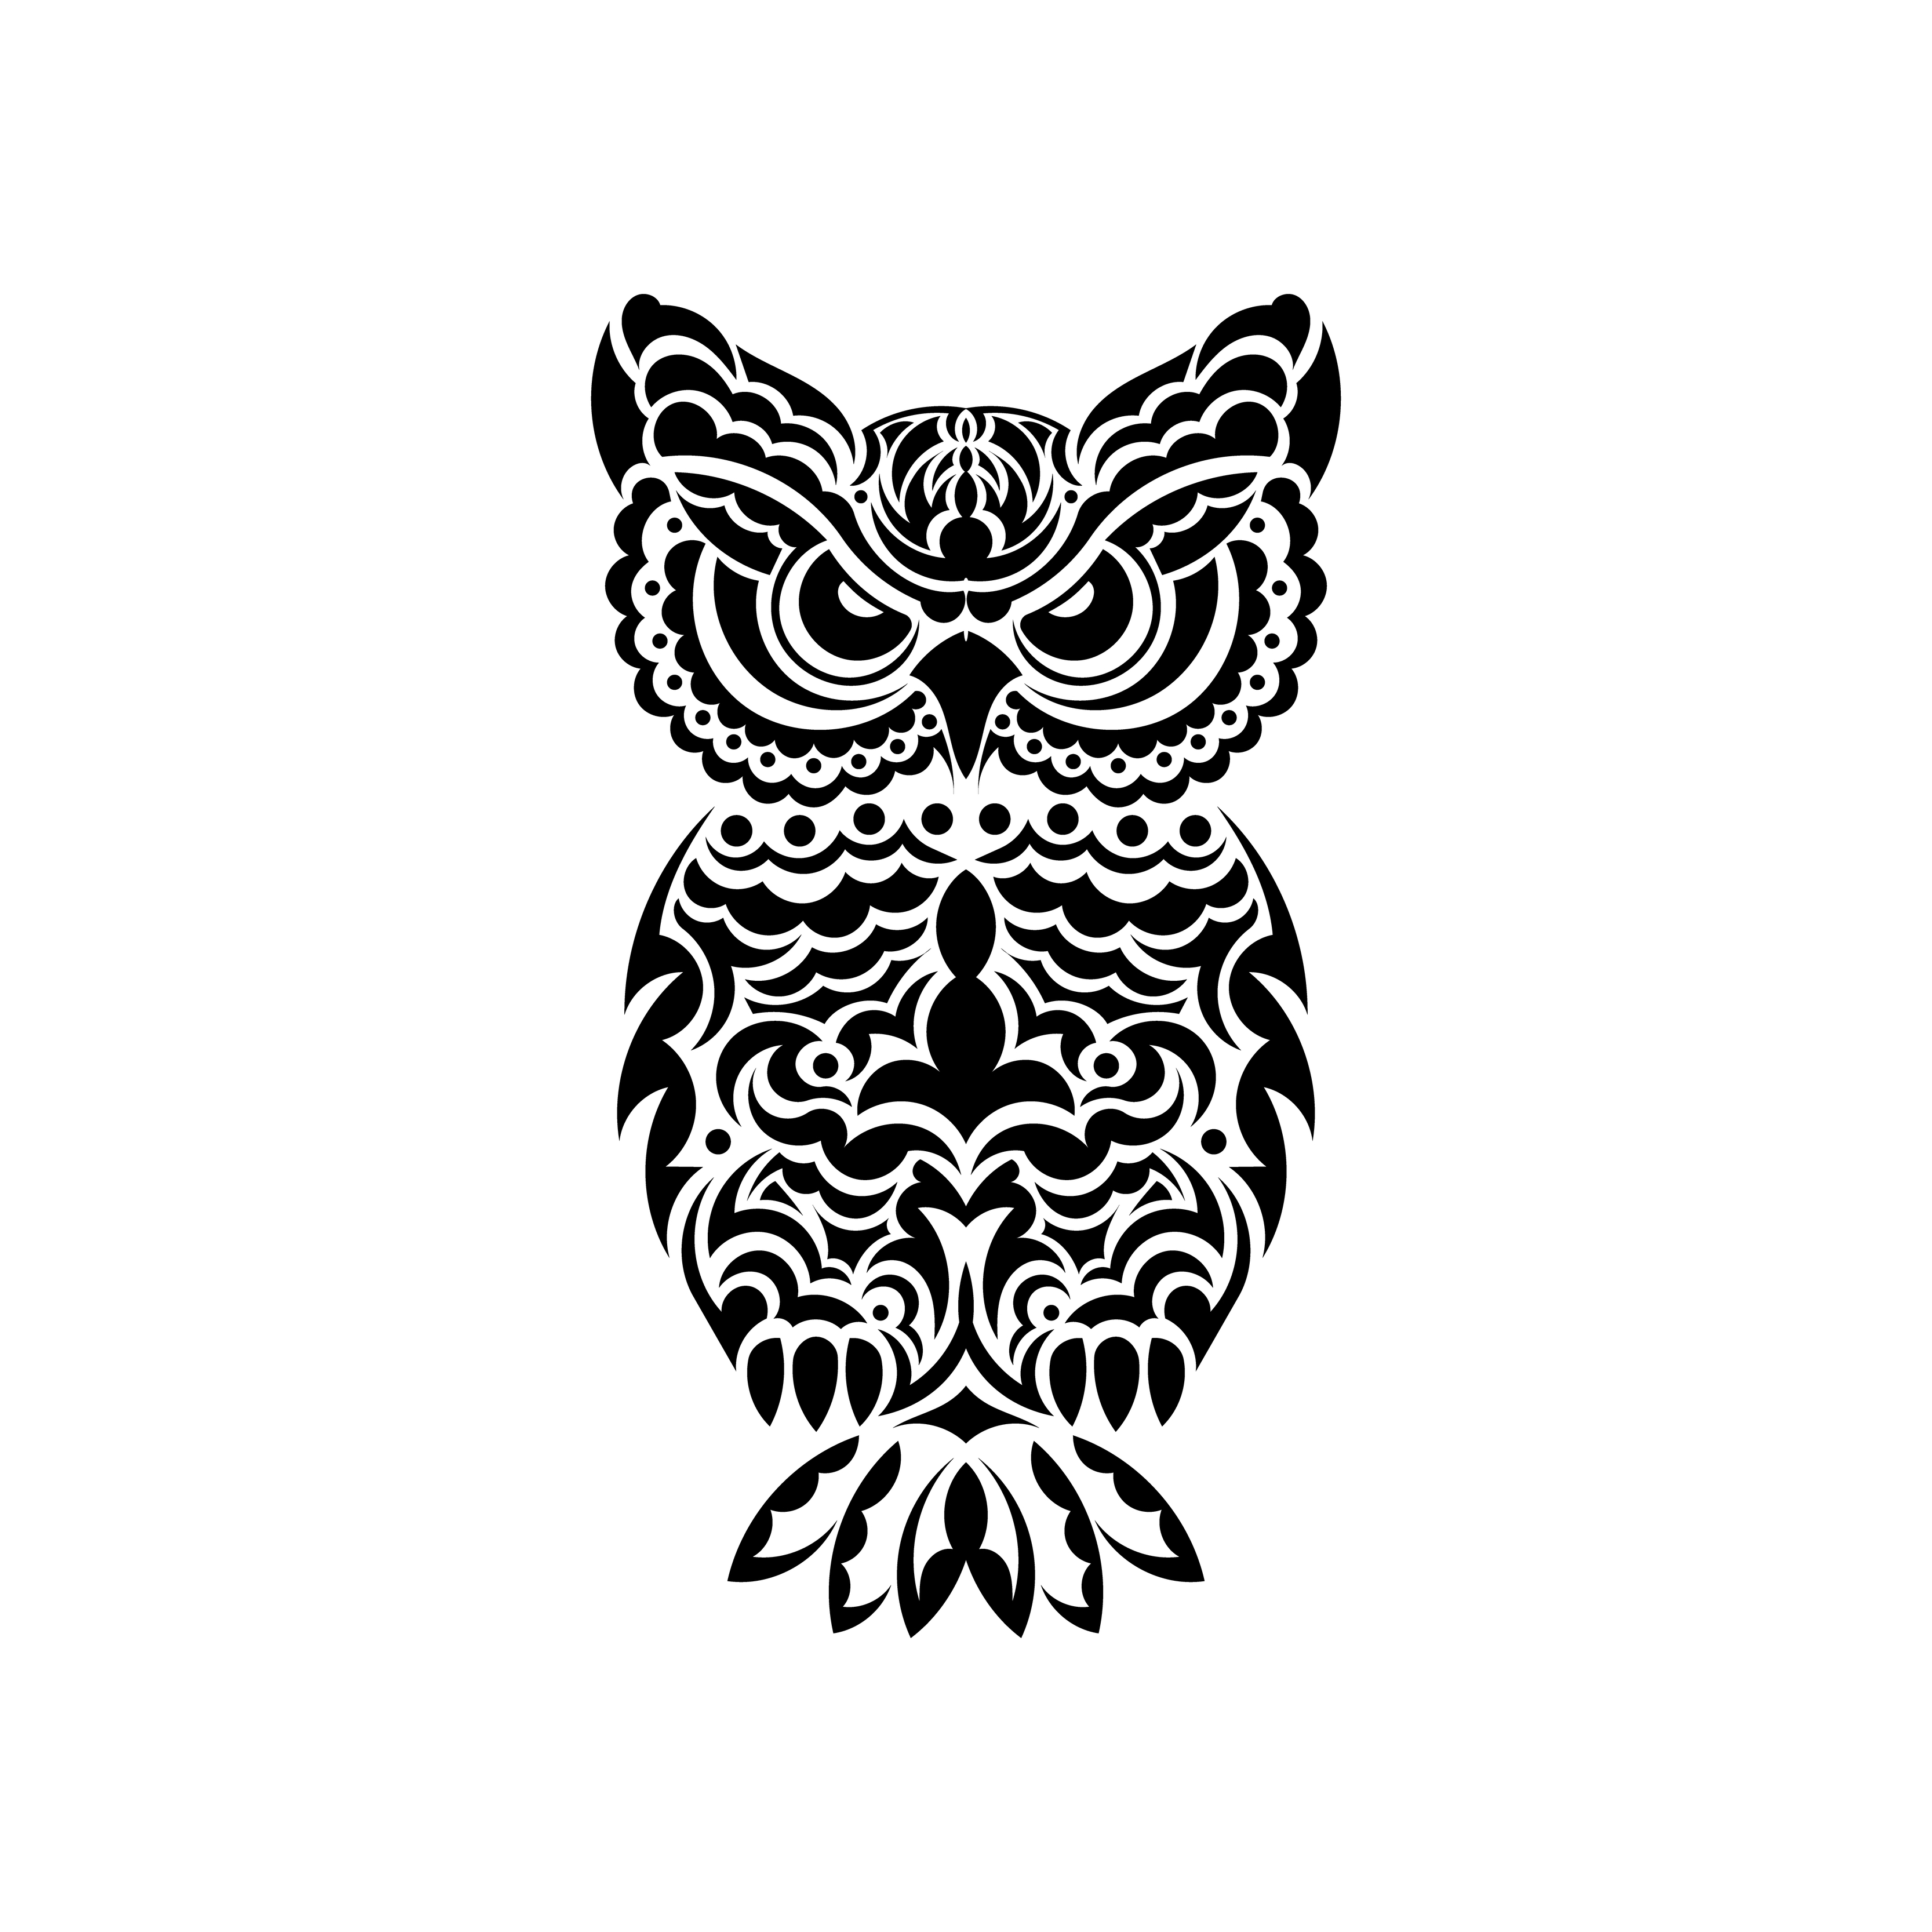 Owl Tattoos 30 Design Ideas Meaning and Symbolism  100 Tattoos